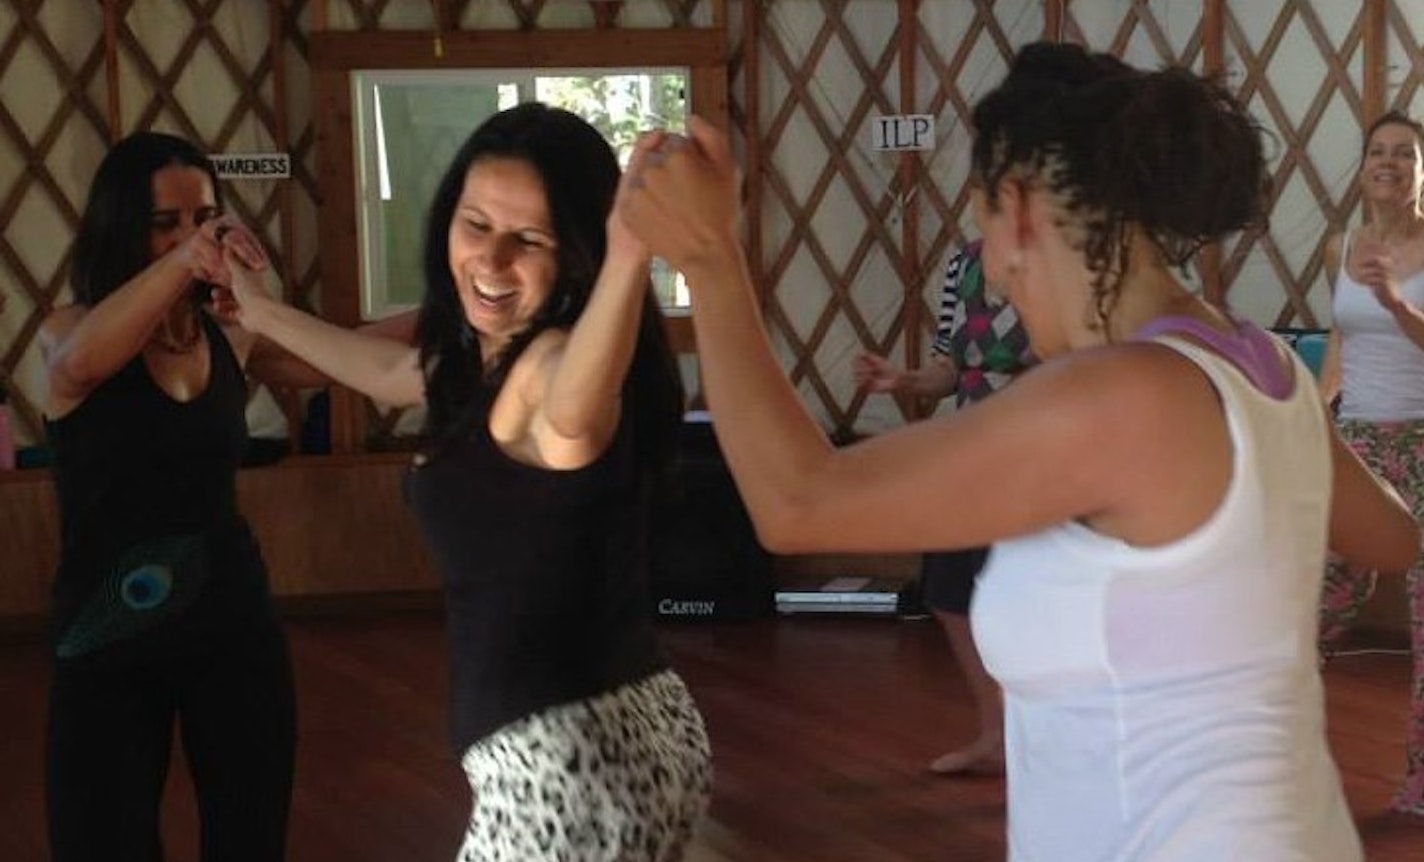 Generate Love and Compassion Through Conscious Dance